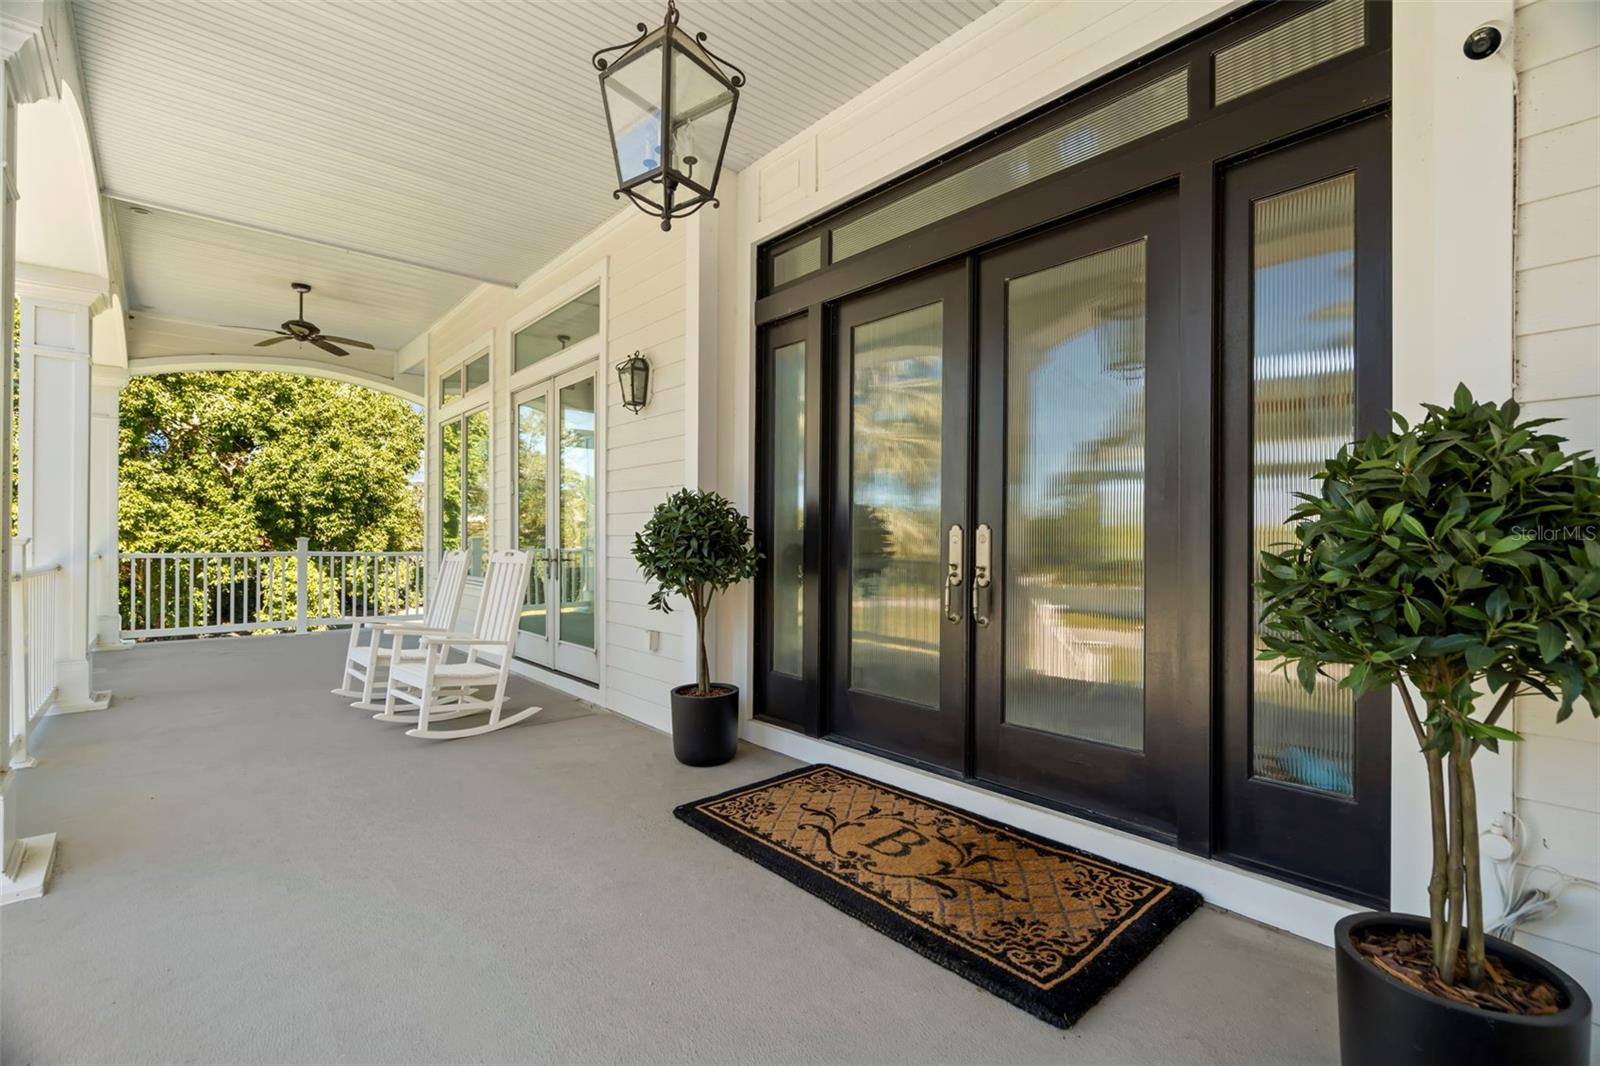 Elegant front entry area and welcoming porch.